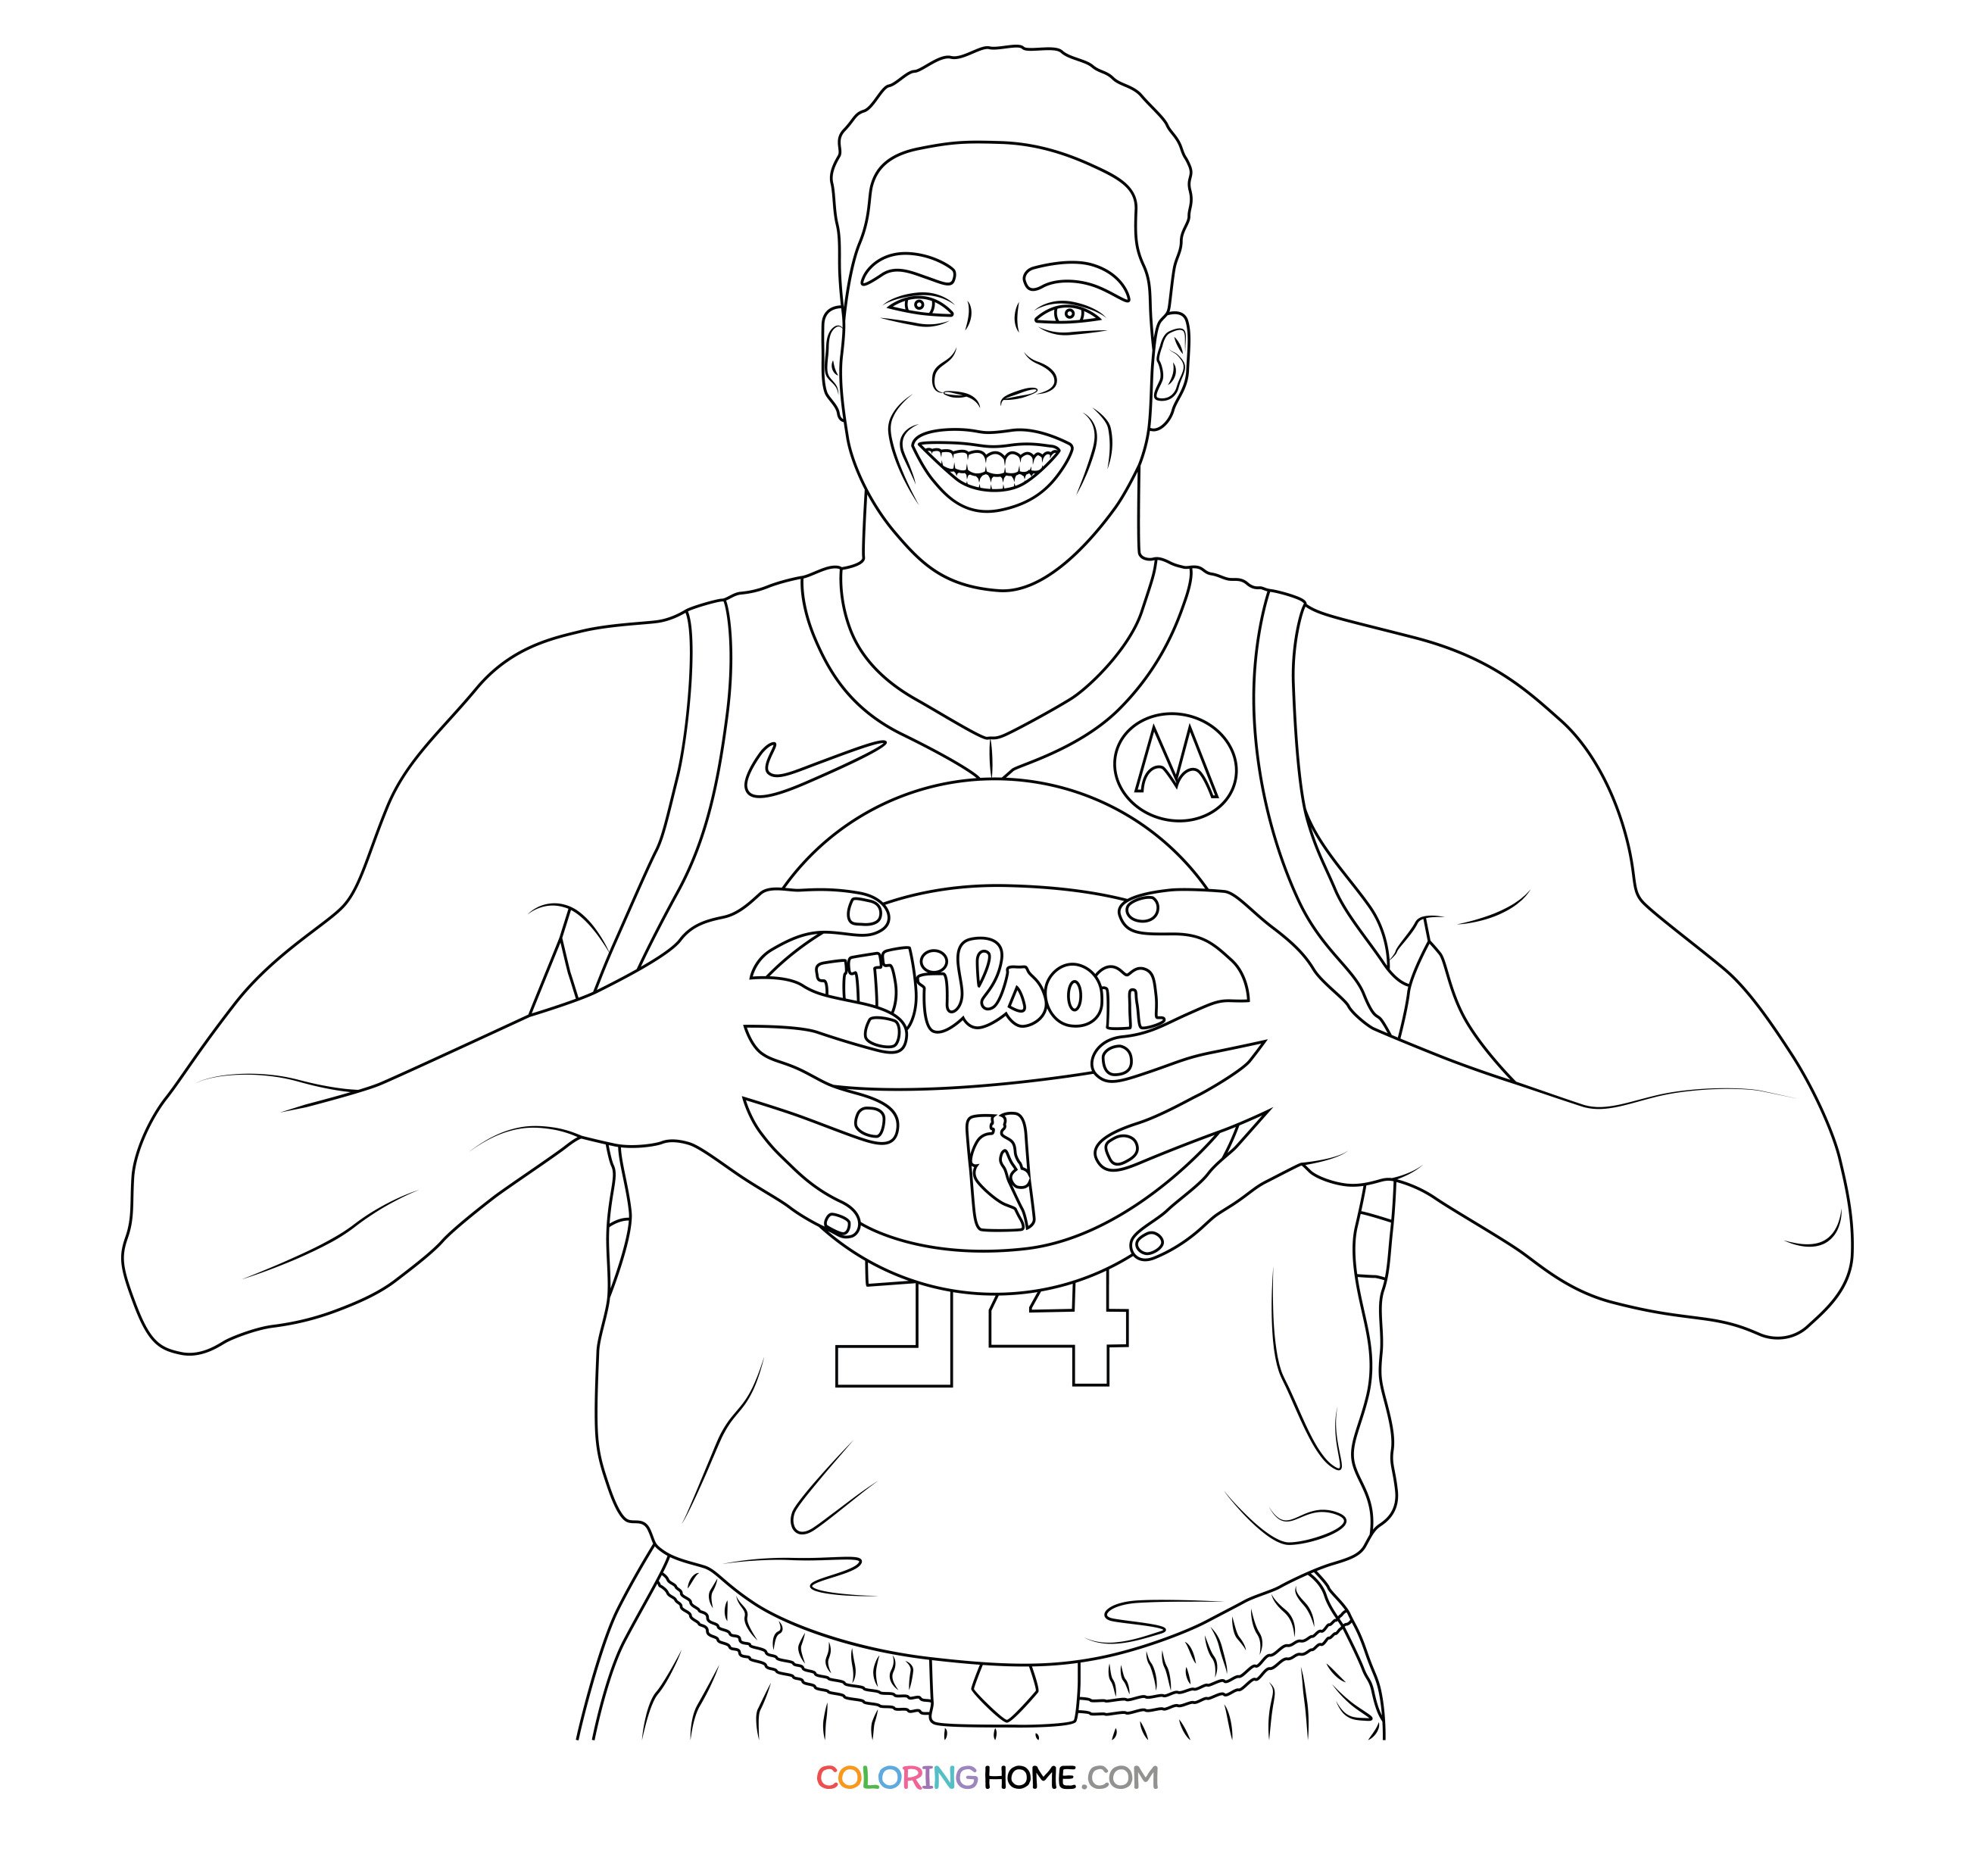 Giannis Antetokounmpo Coloring Page - Coloring Home